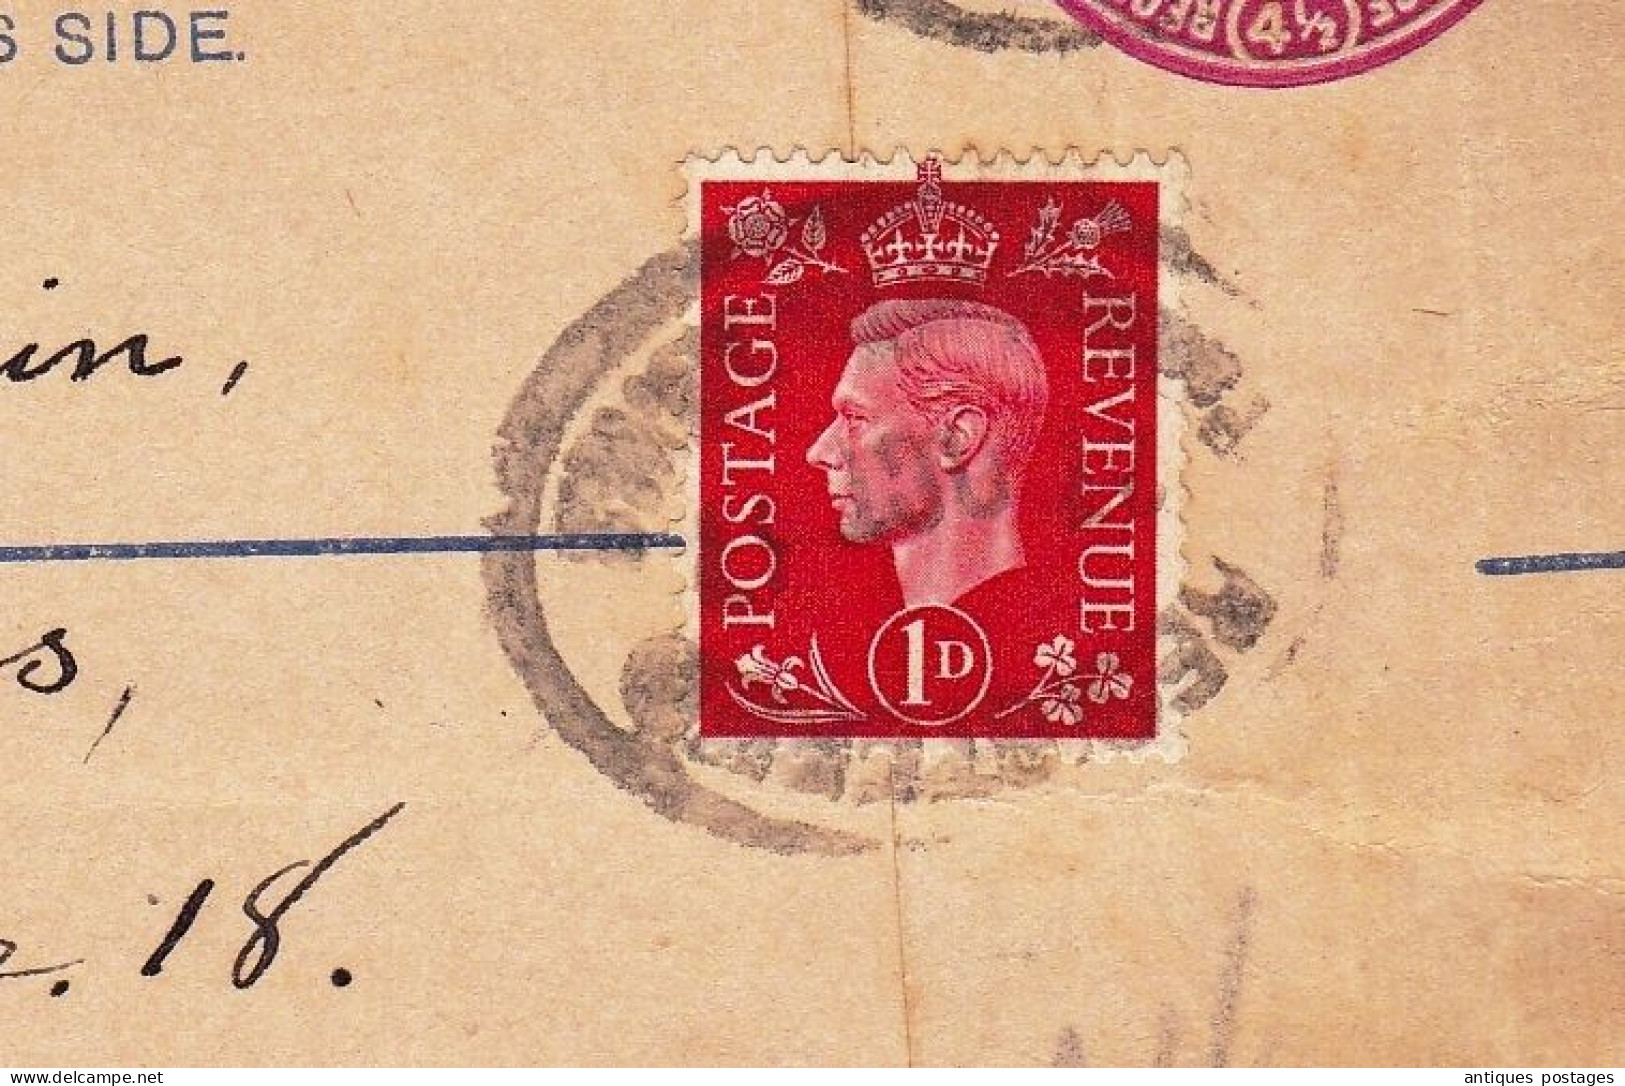 Registered Letter Paddington Anvers Antwerpen Belgique REGISTRATION THREE PENCE - POSTAGE THREE HALFPENCE (4 1/2) - Stamped Stationery, Airletters & Aerogrammes